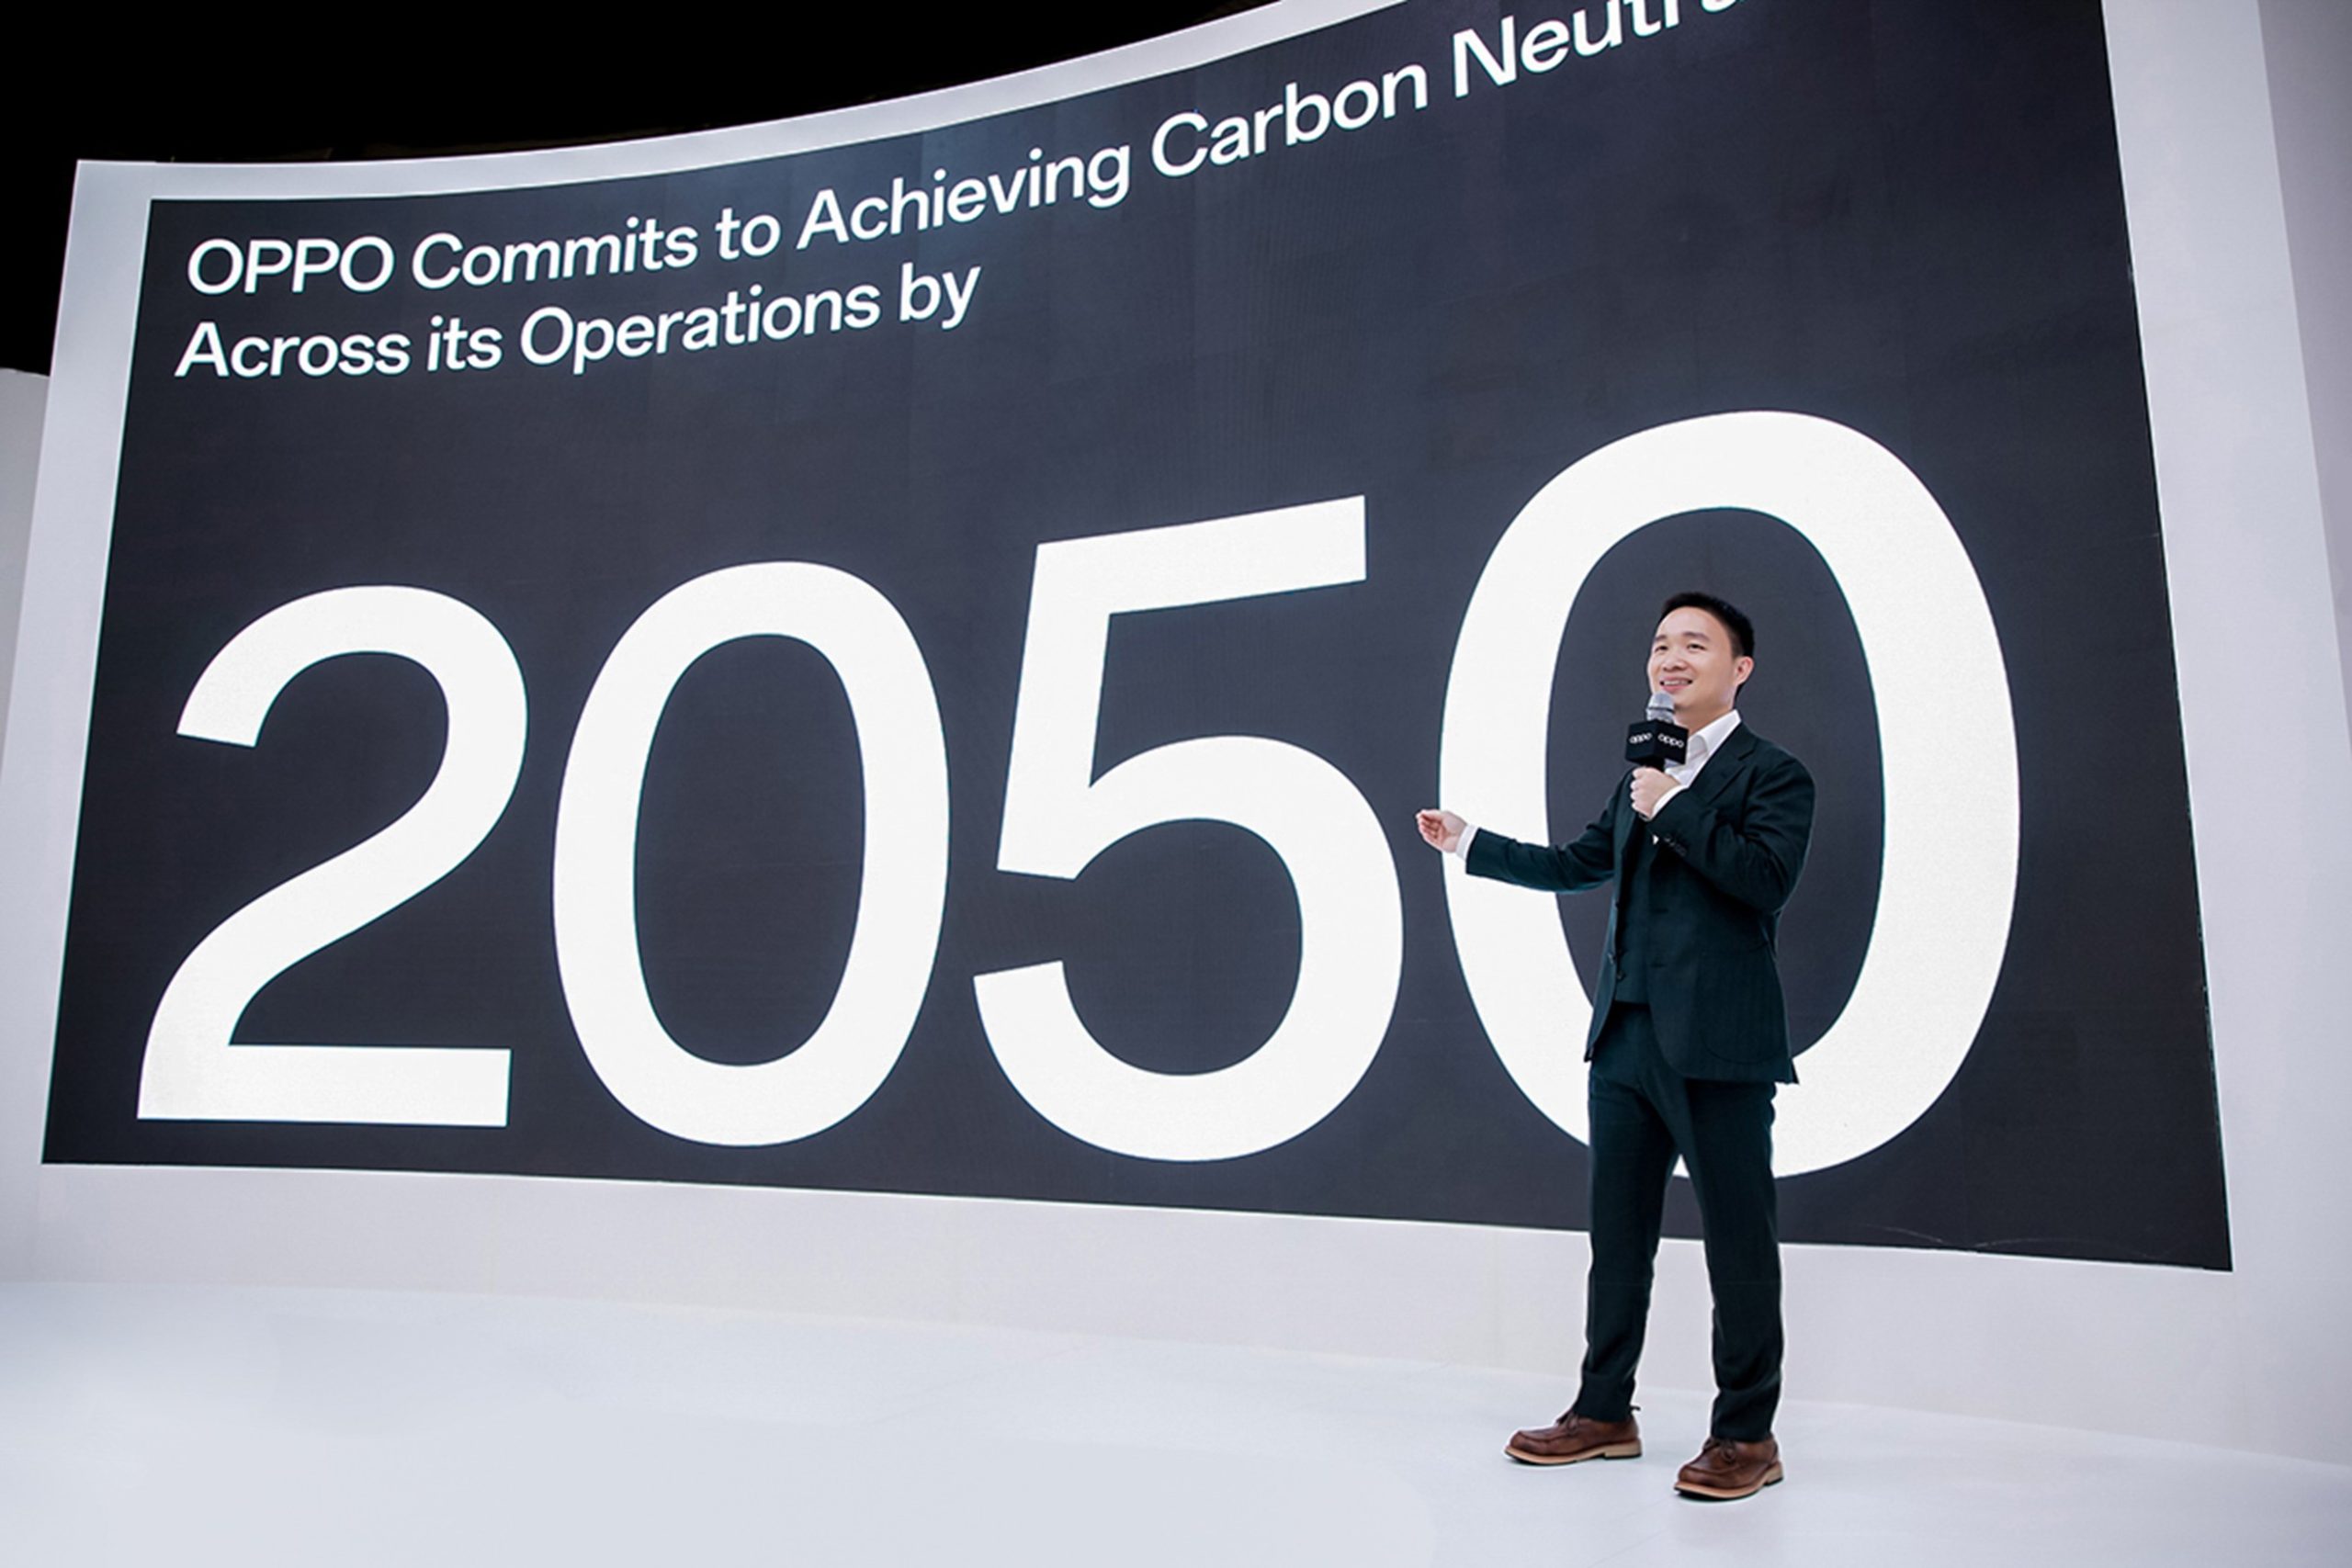 OPPO commits to achieving carbon neutrality across its operations by 2050